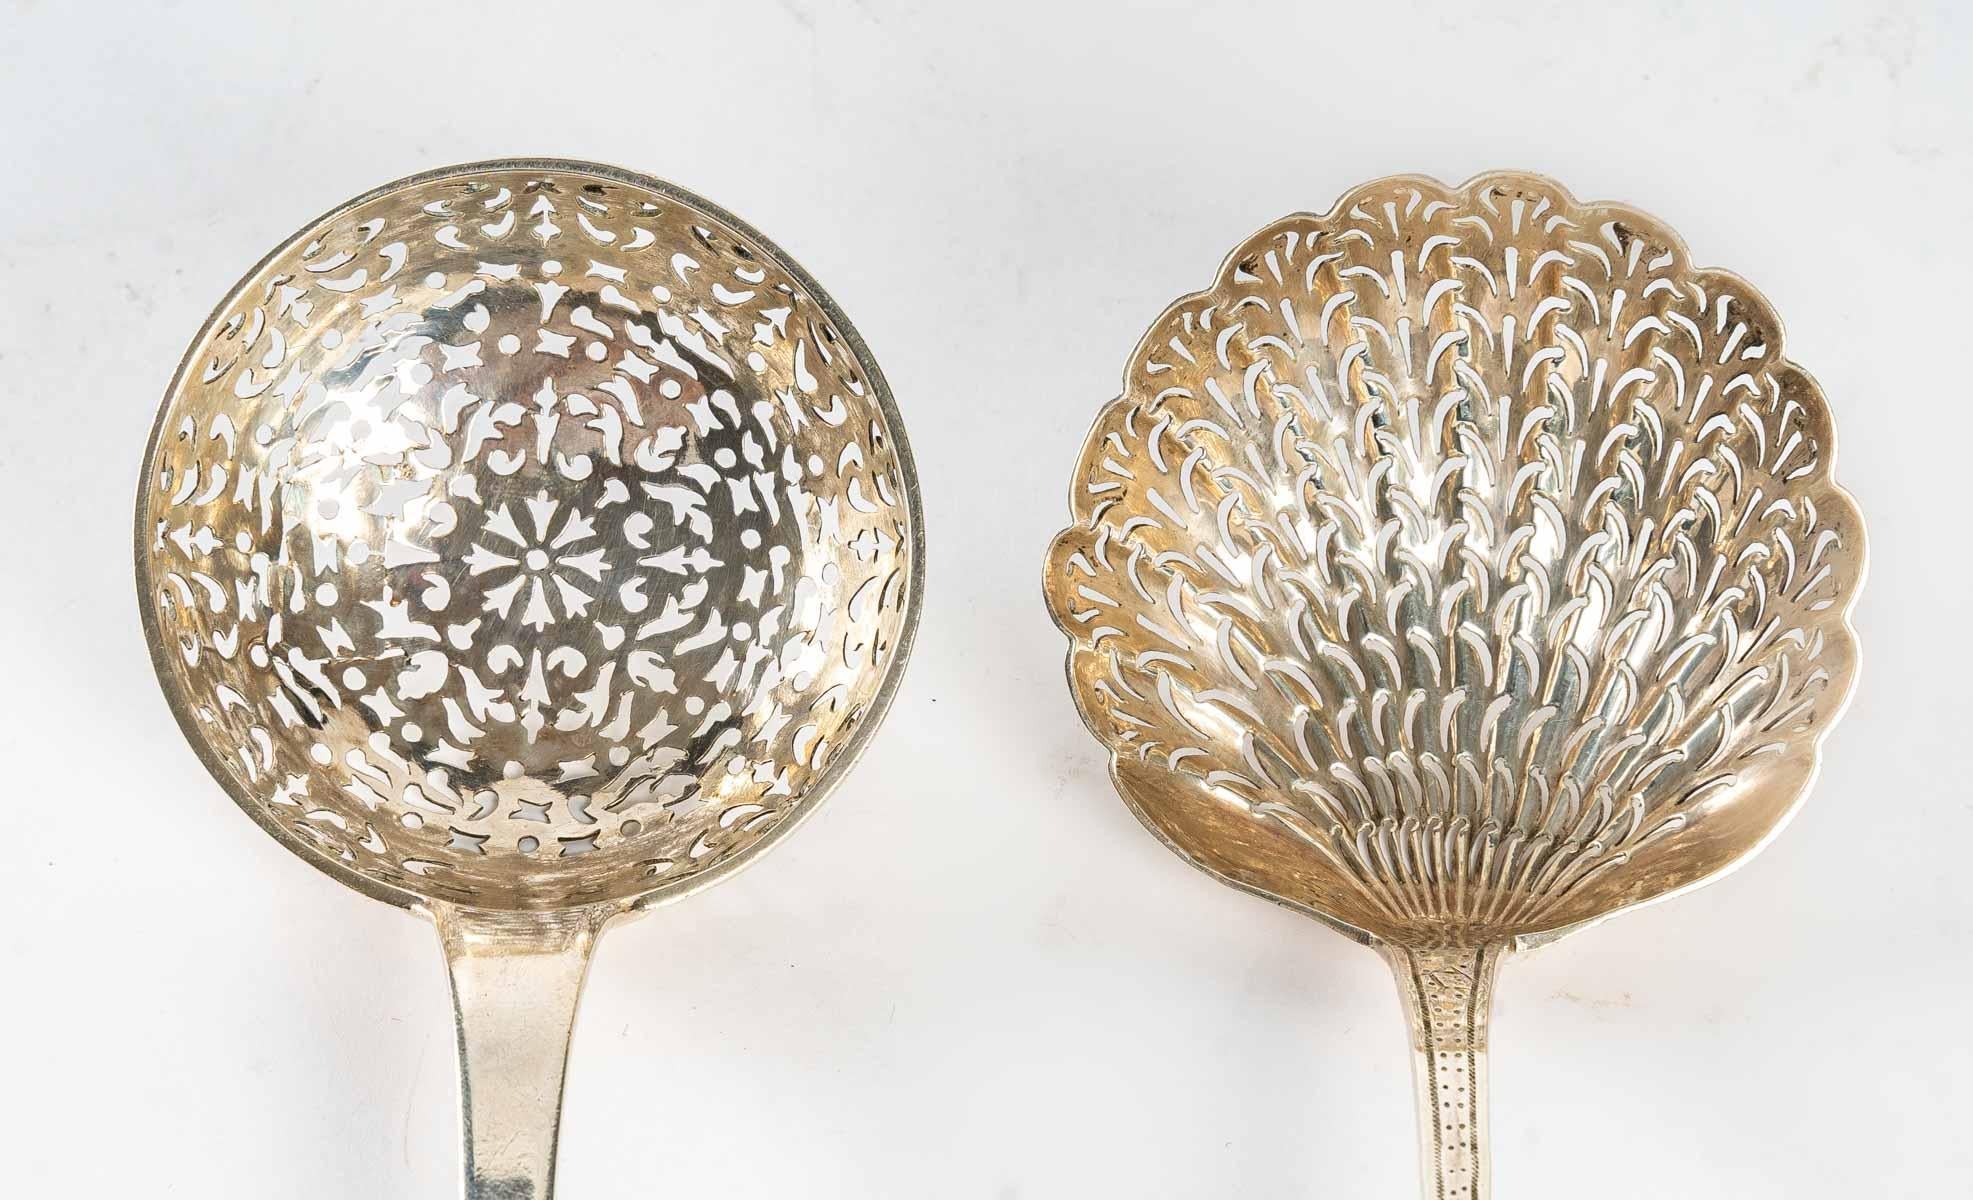 Magnificent Lot of Two Sprinkling Spoons, 19th Century, Sterling Silver For Sale 2